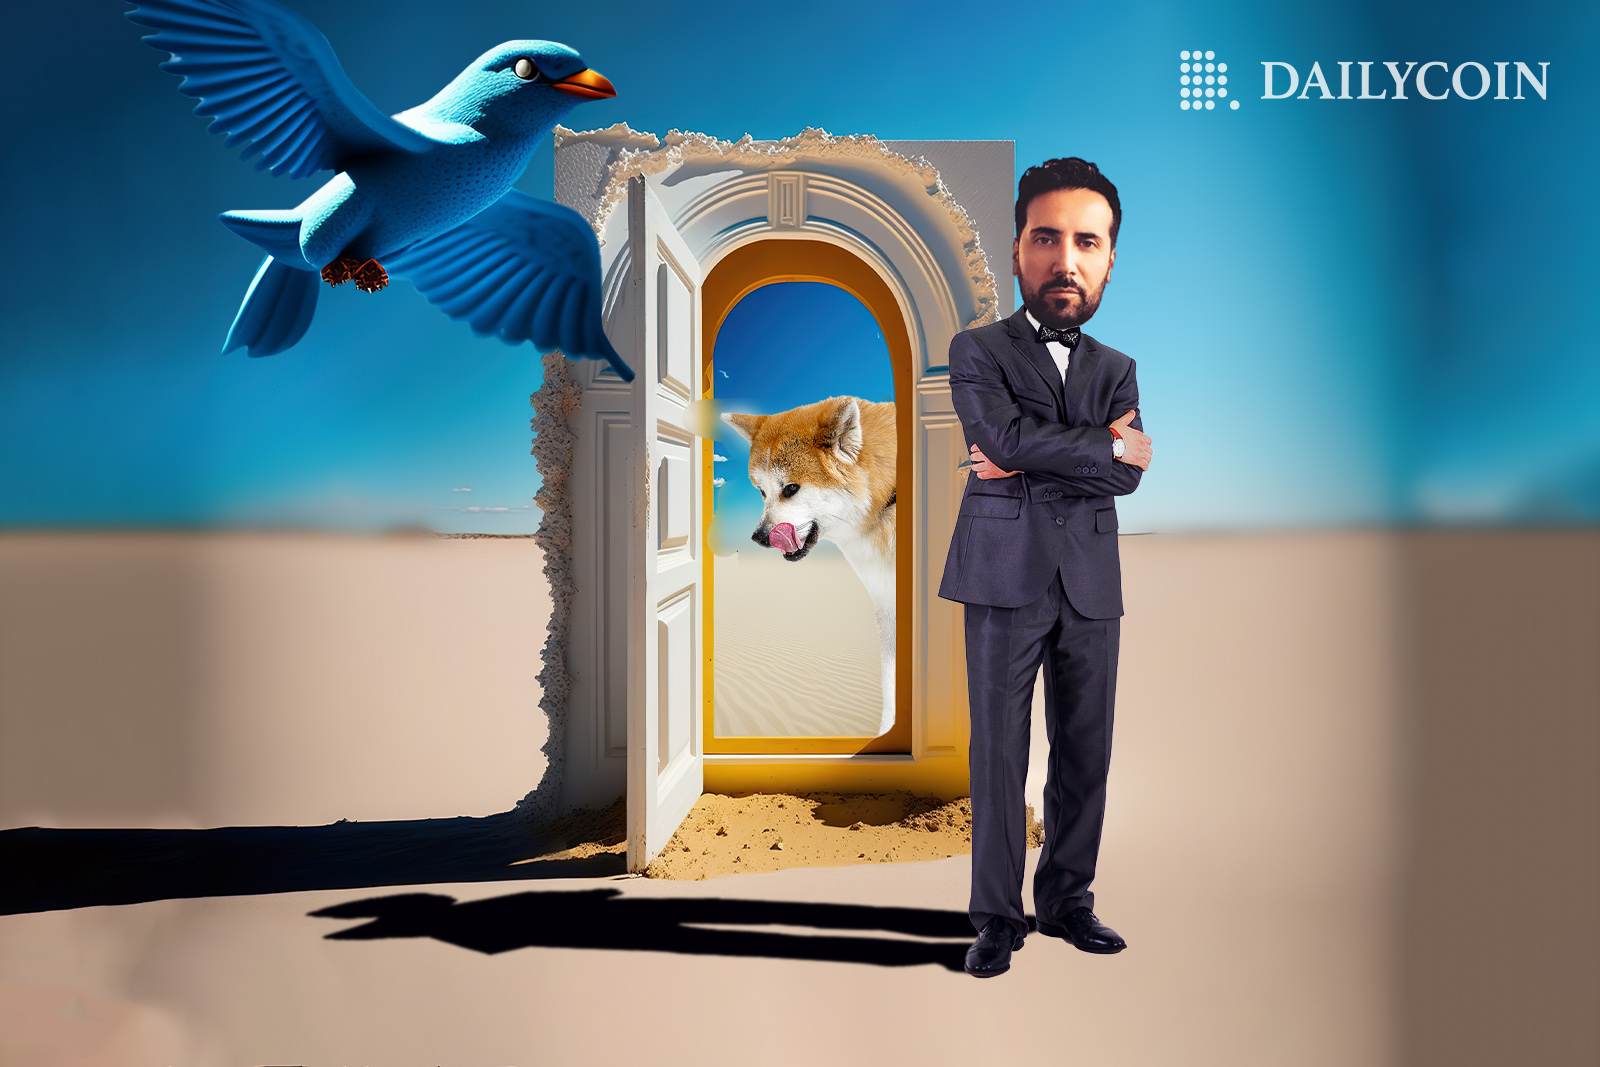 David Gokhshtein standing in front of an open door with Shiba Inu behind it while blue Twitter bird is flying by,